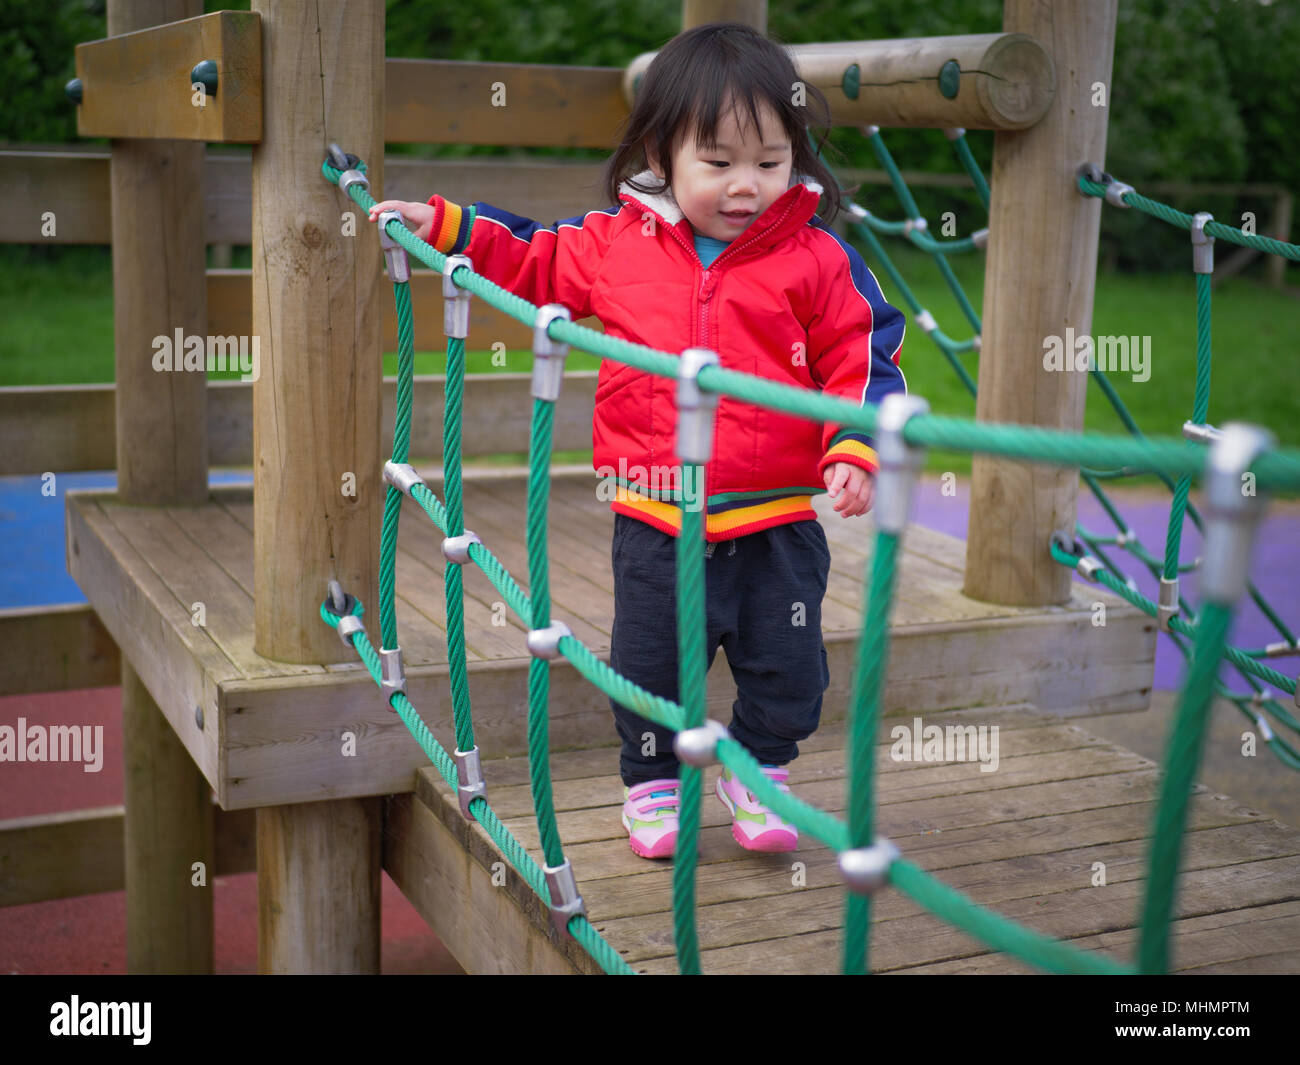 Baby girl play at outdoor playground Stock Photo